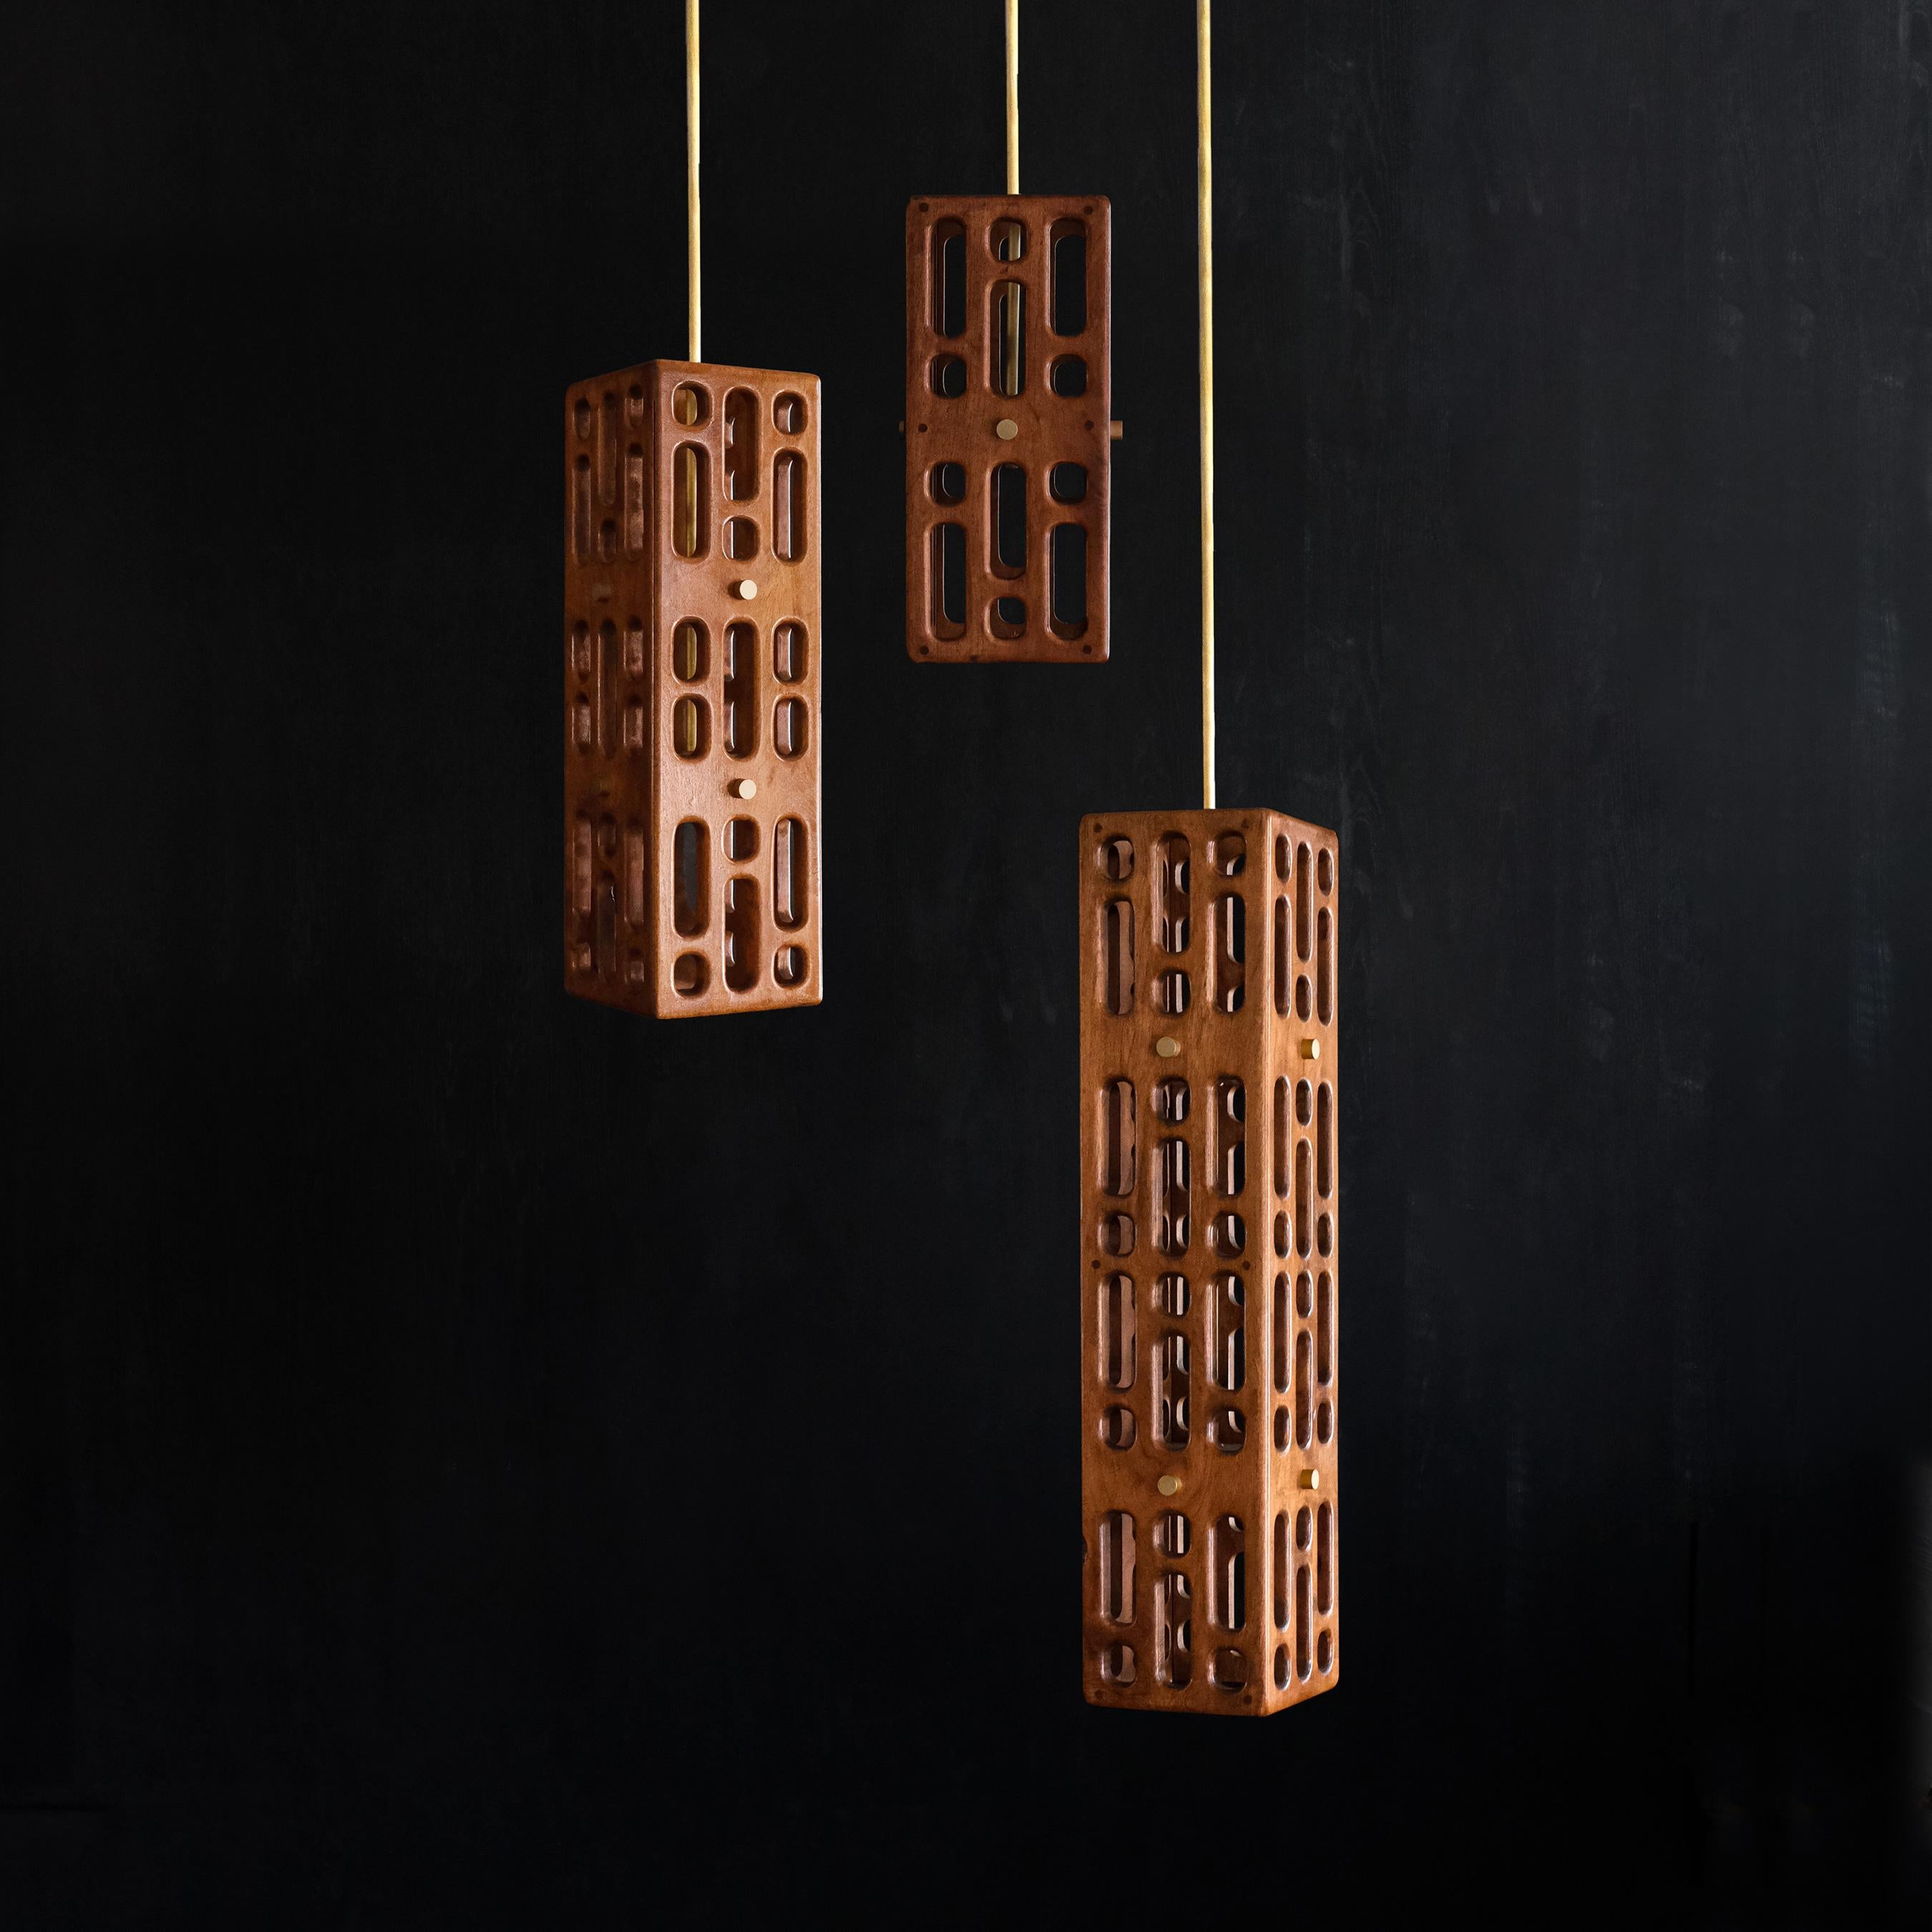 Celosías–wooden latticework–have played a recurring role in Mexican history. From the country’s deep relationship with religion to its Modernist architecture, Mexico’s appreciation for function and beauty is invoked in these structured forms. The